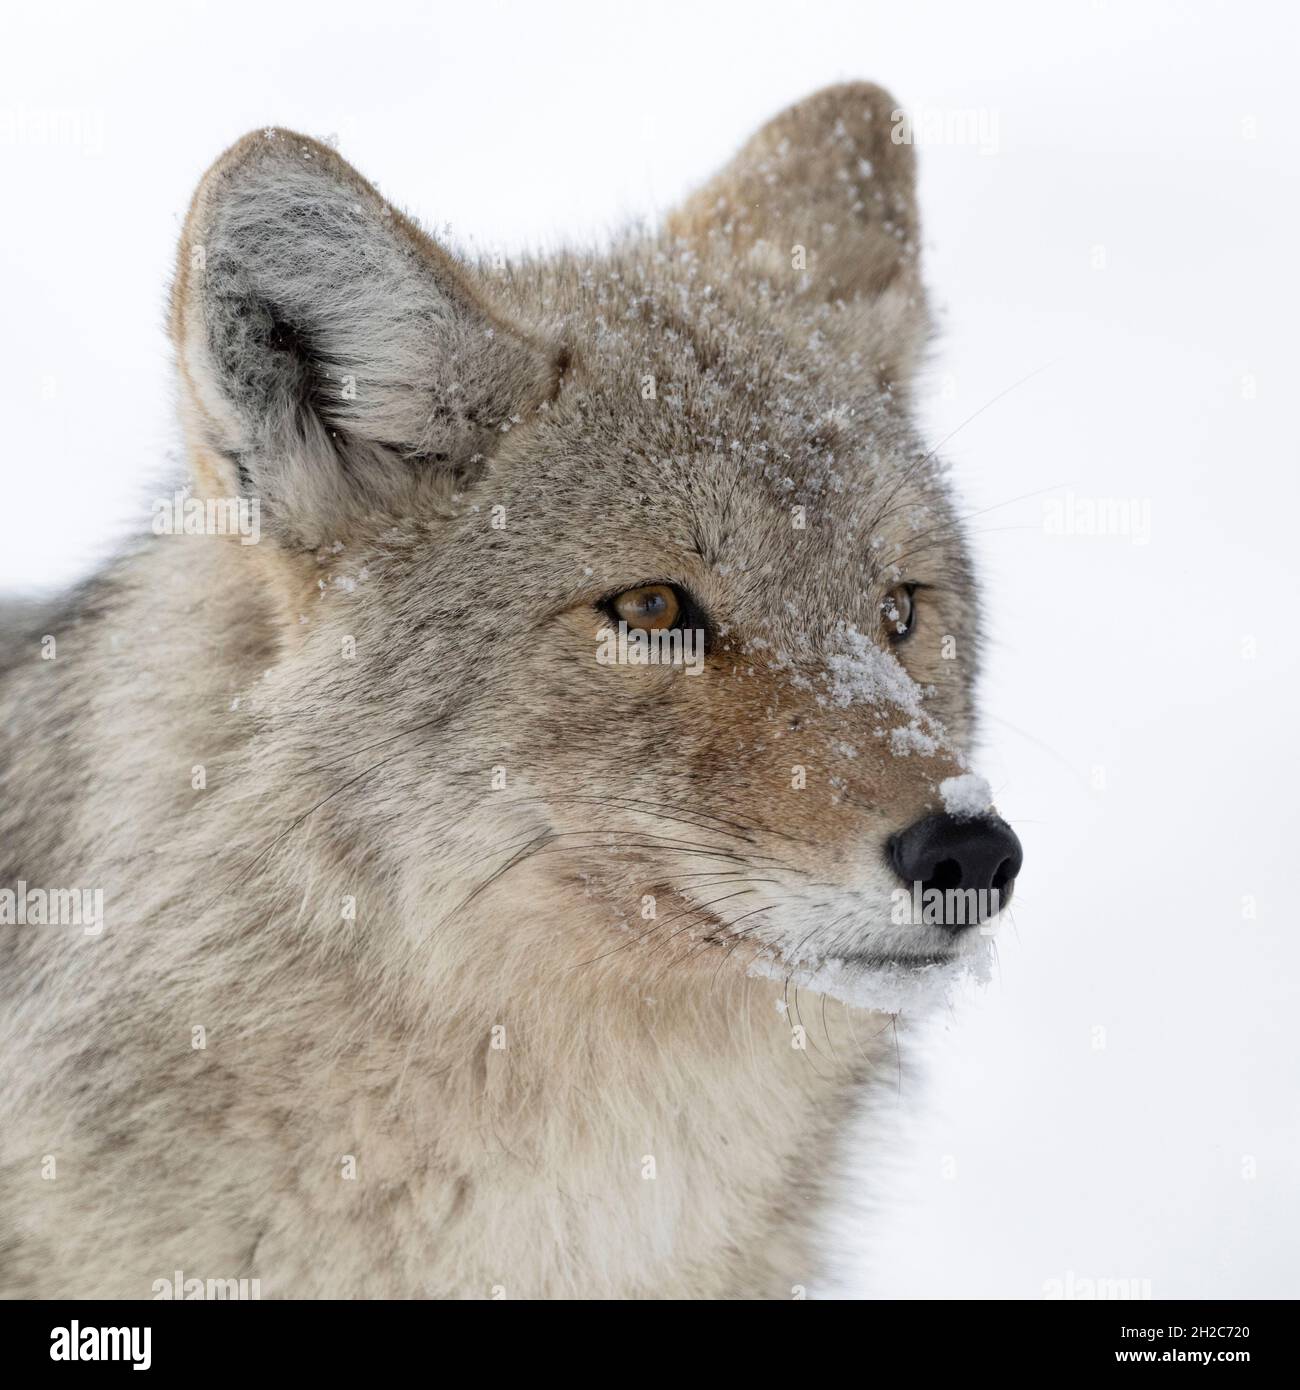 Coyote ( Canis latrans ) in winter, close-up of an adult animal in snow, detailled headshot, covered with snowflakes , wildlife, Yellowstone NP, USA. Stock Photo